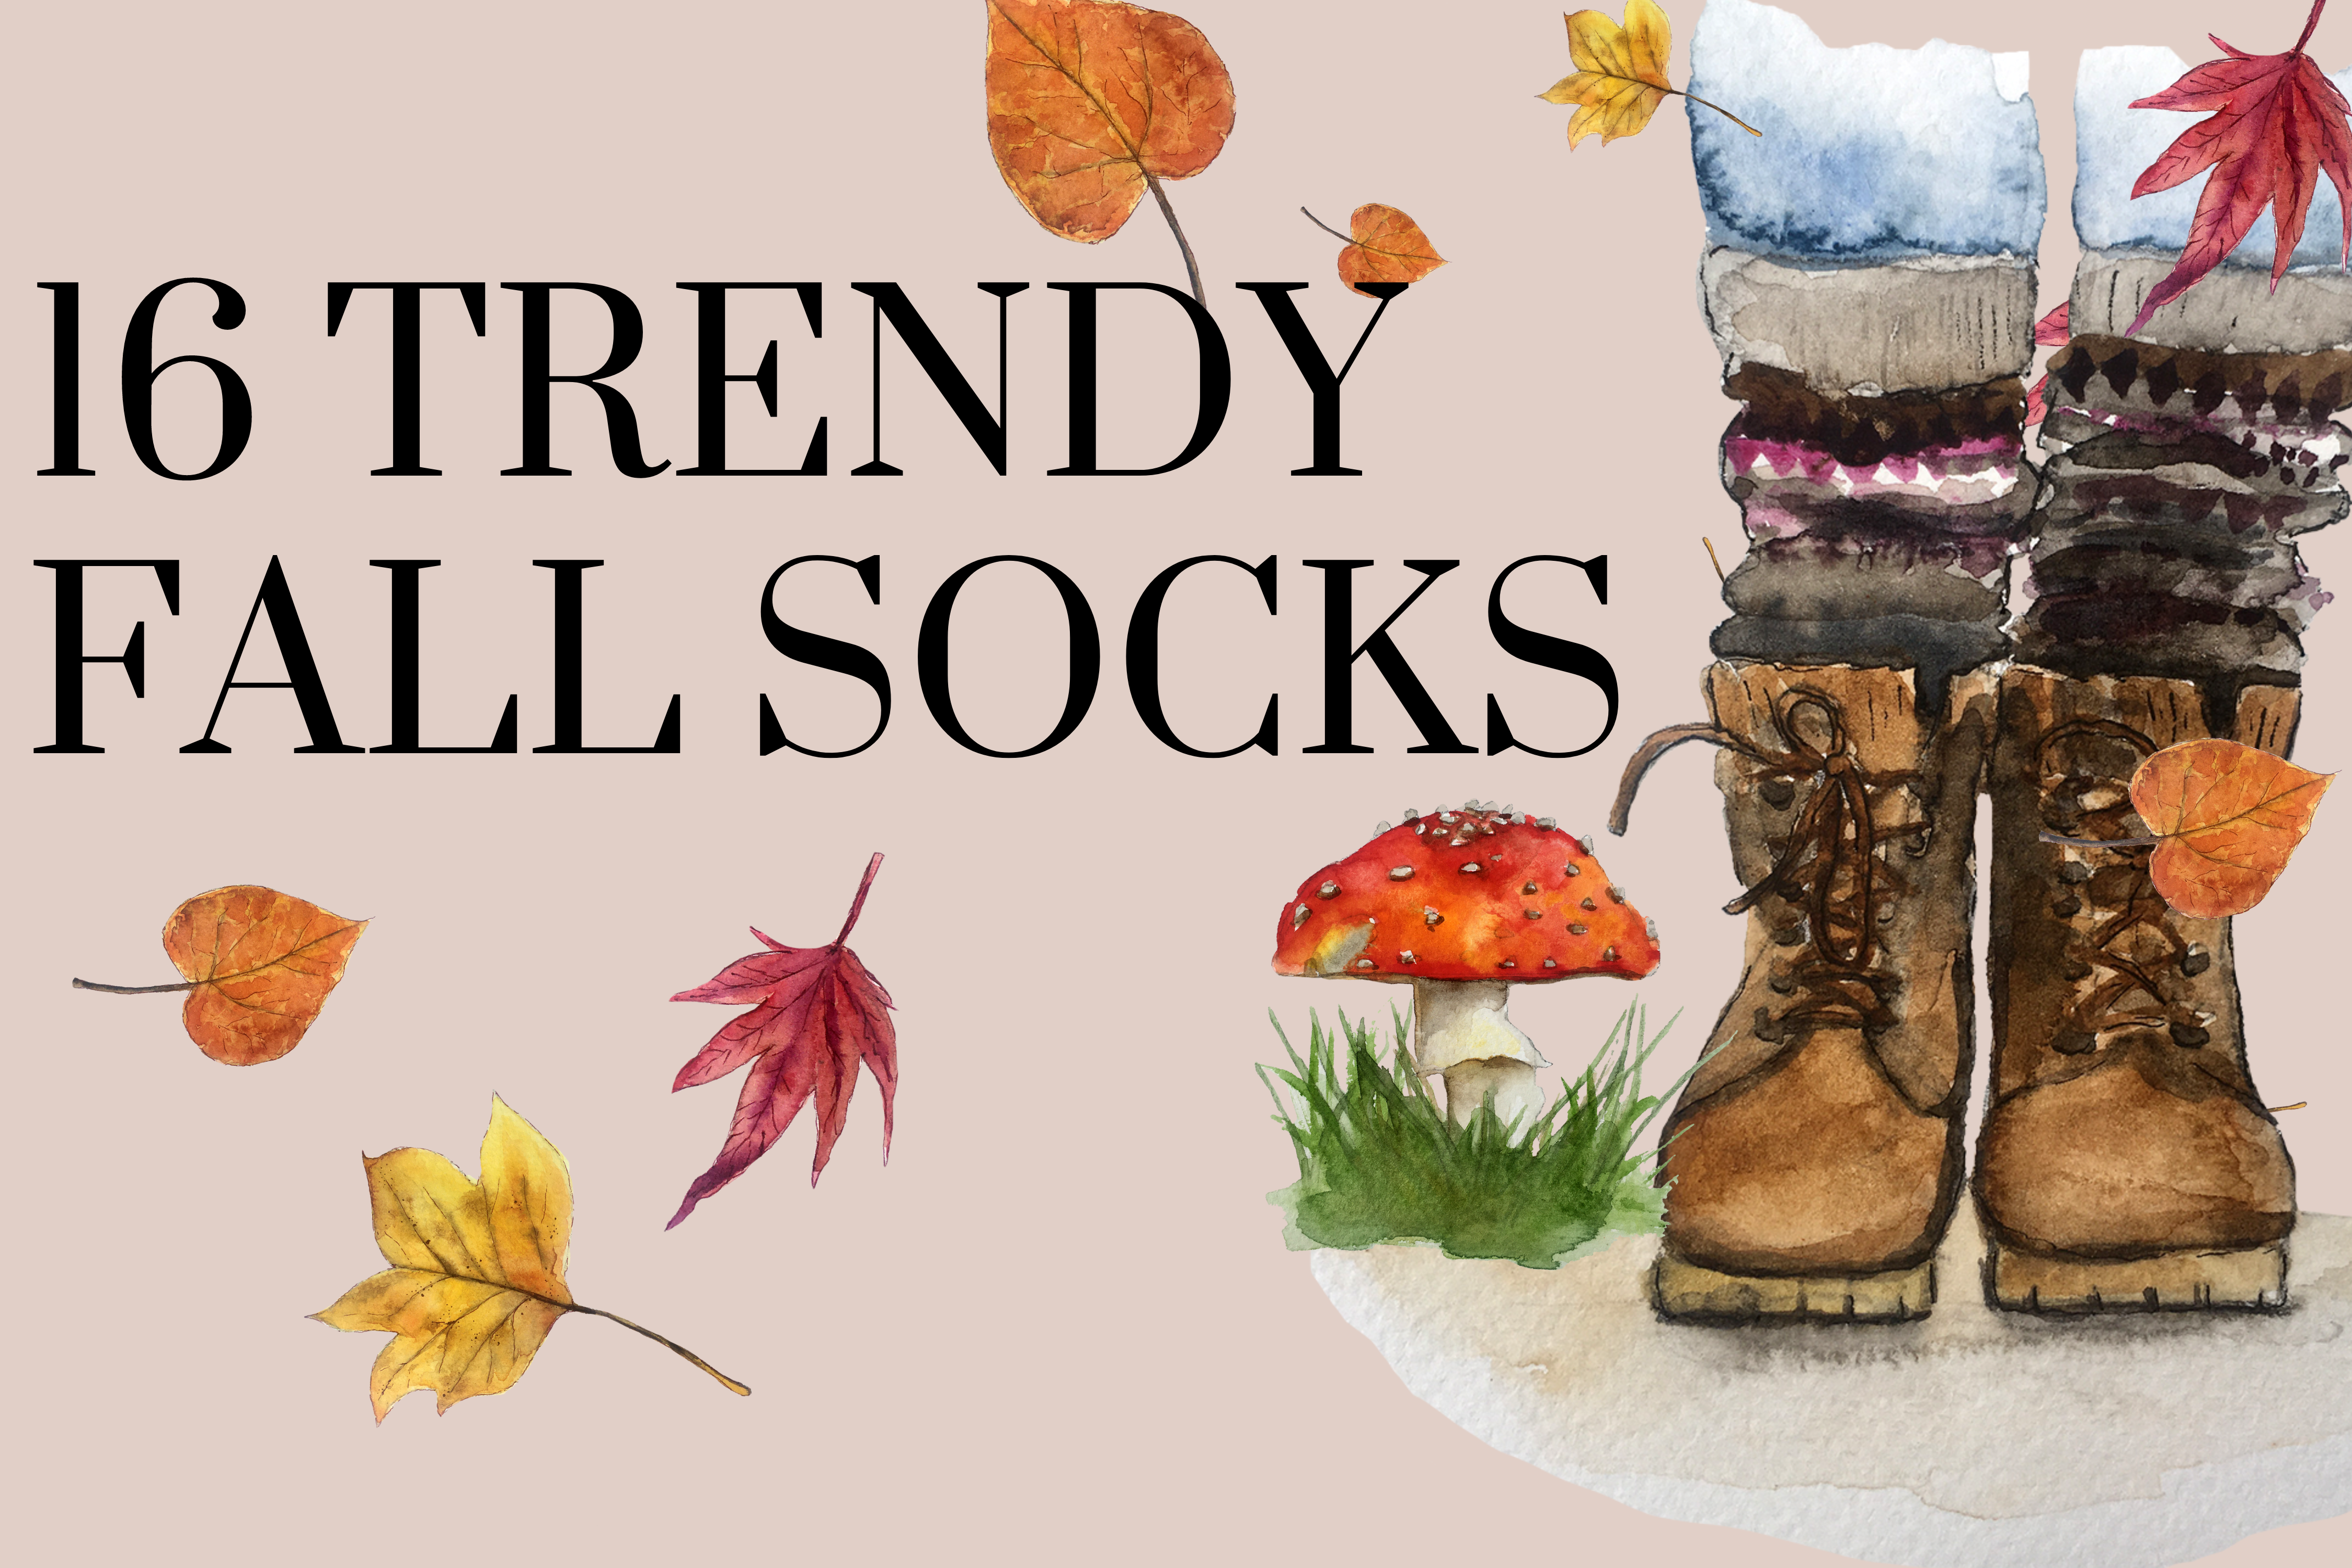 https://caileymaclean.com/wp-content/uploads/2022/07/Fall-socks-2.png